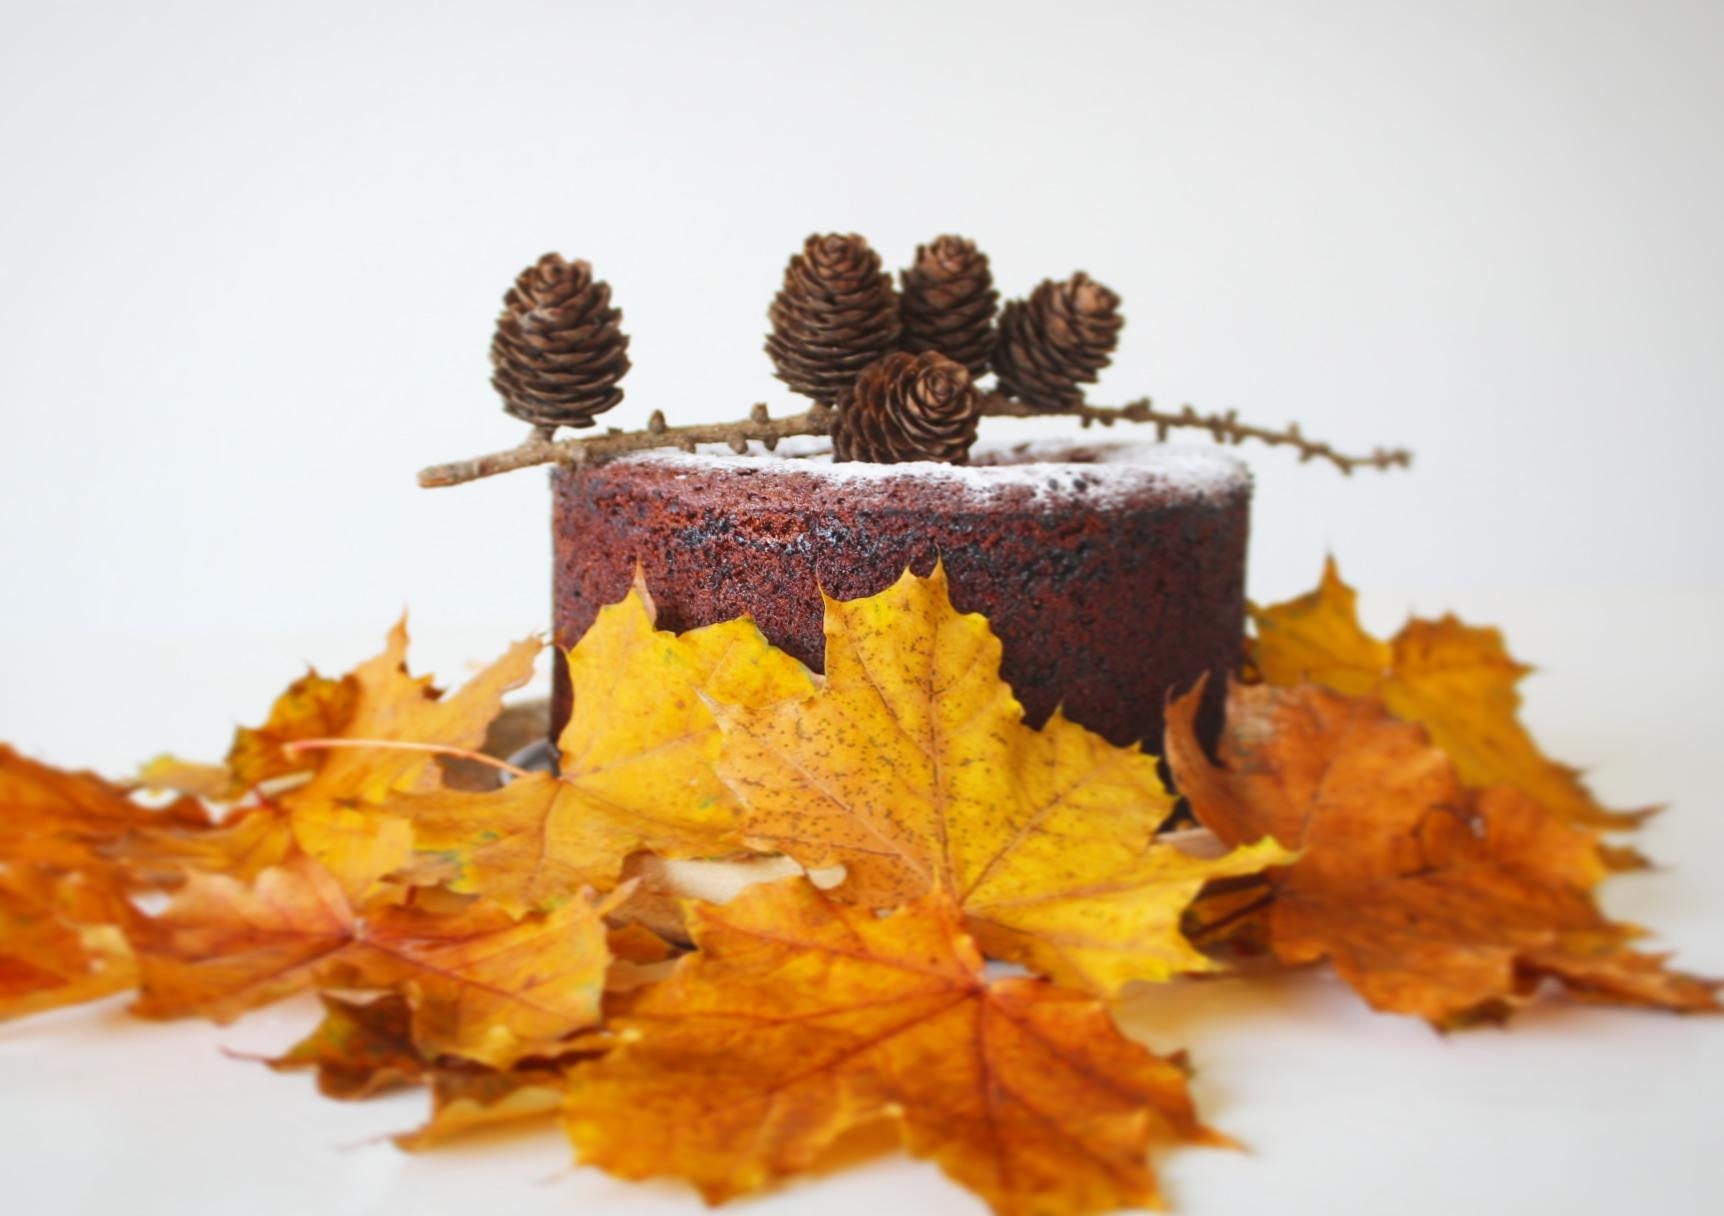 #cakelover #cake #autumn #couchstyle #lecker !